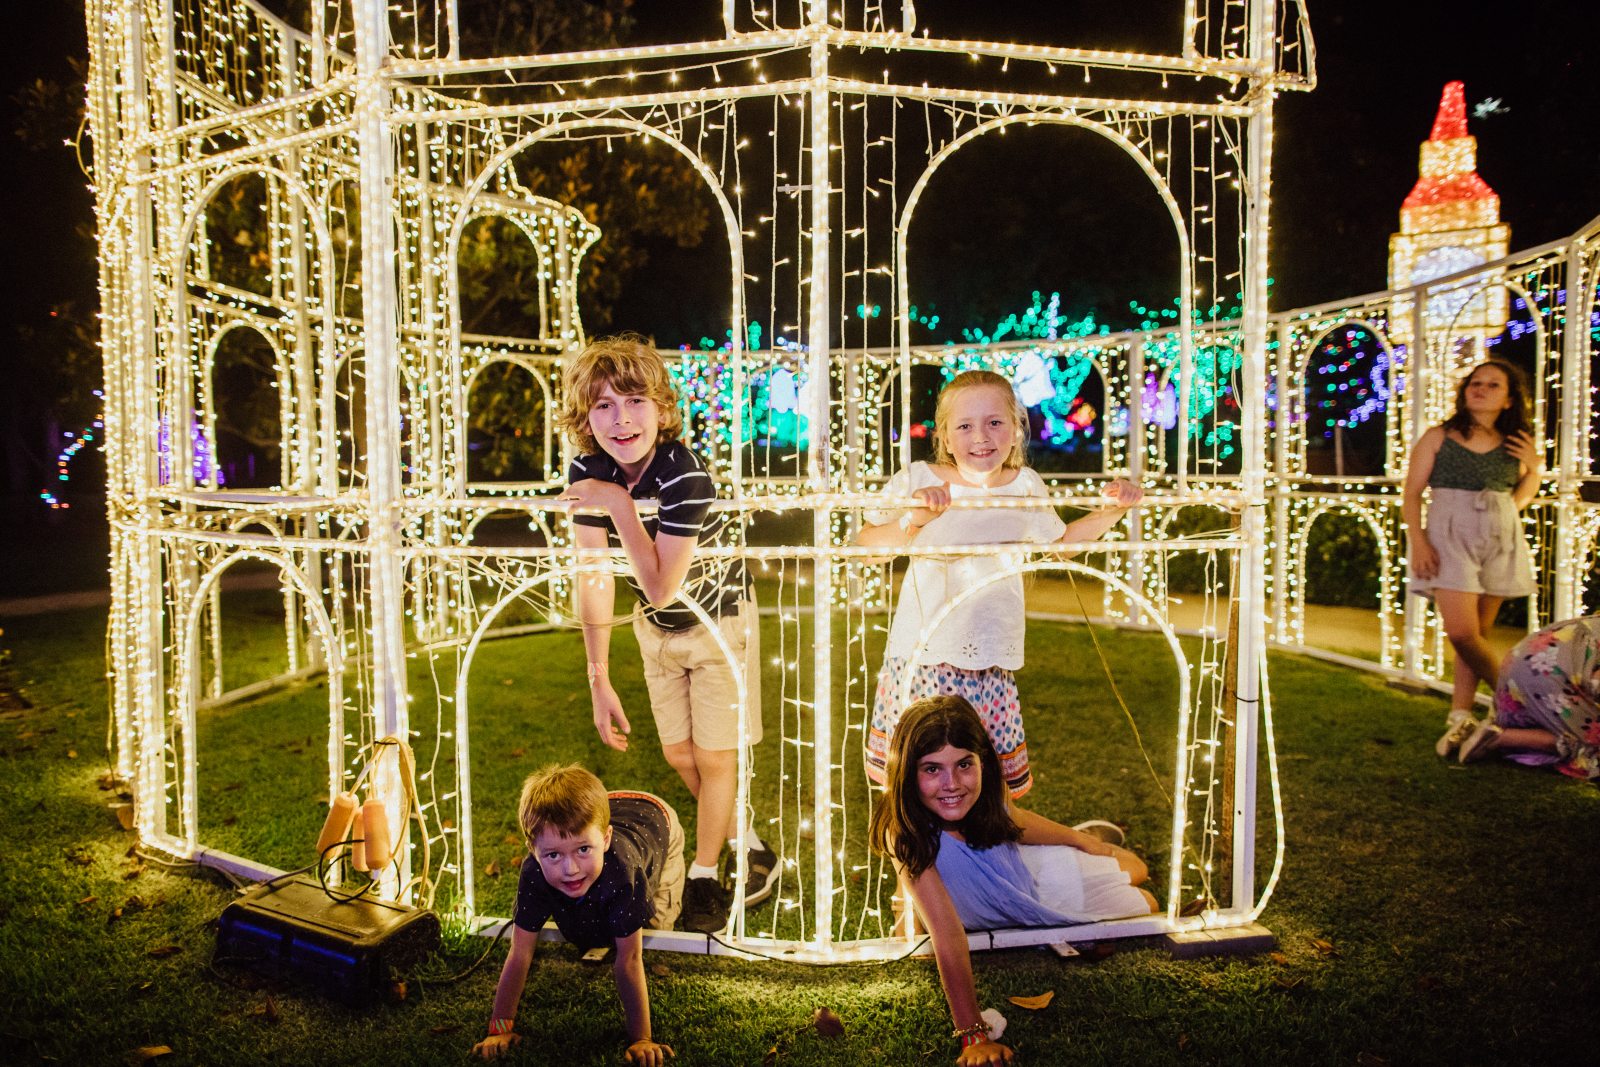 Hunter Valley Gardens Christmas Lights Playing in Puddles